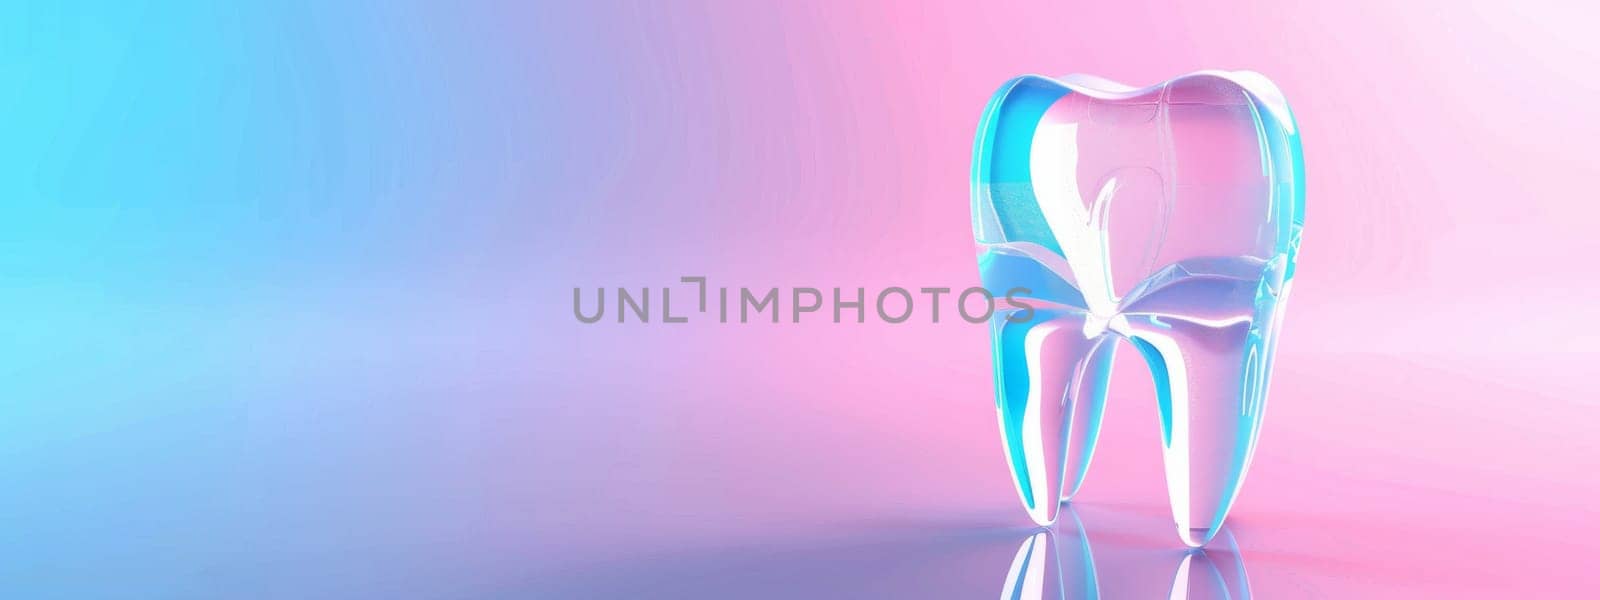 Model of tooth isolated on blue and pink background with a copy space, healthcare concept